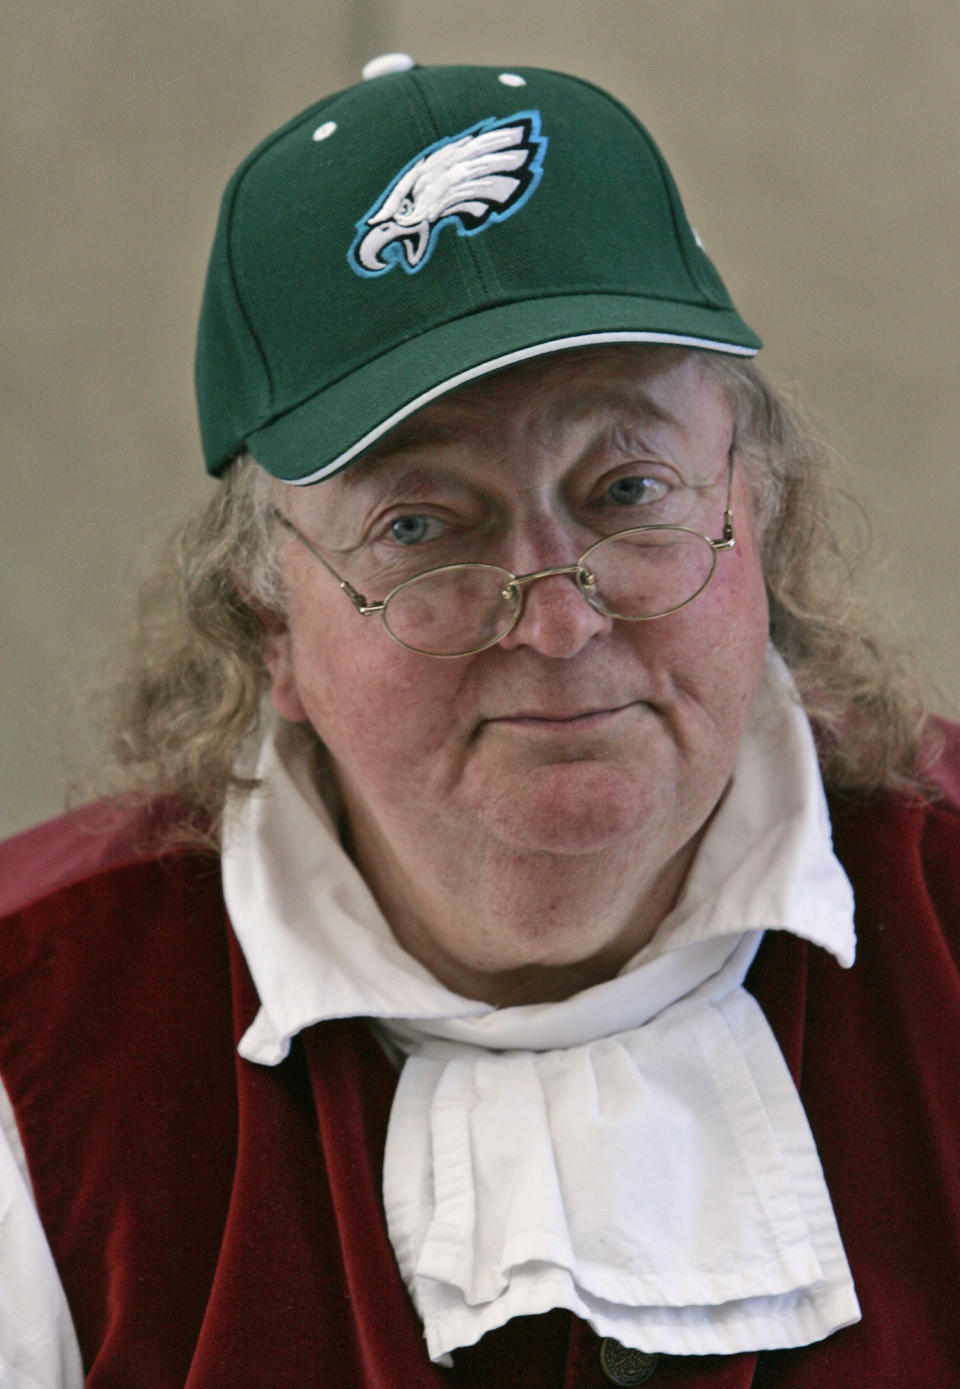 FILE – In this Feb. 2, 2005, file photo, re-enactor Ralph Archbold, portraying Benjamin Franklin, wears a Philadelphia Eagles cap during an event to promote the Super Bowl matchup between the Eagles and the New England Patriots, at the National Constitution Center in Philadelphia. Archbold, who portrayed Franklin in Philadelphia for more than 40 years, died Saturday, March 25, 2017, at age 75, according to the Alleva Funeral Home in Paoli, Pa. (AP Photo/Jacqueline Larma, File)